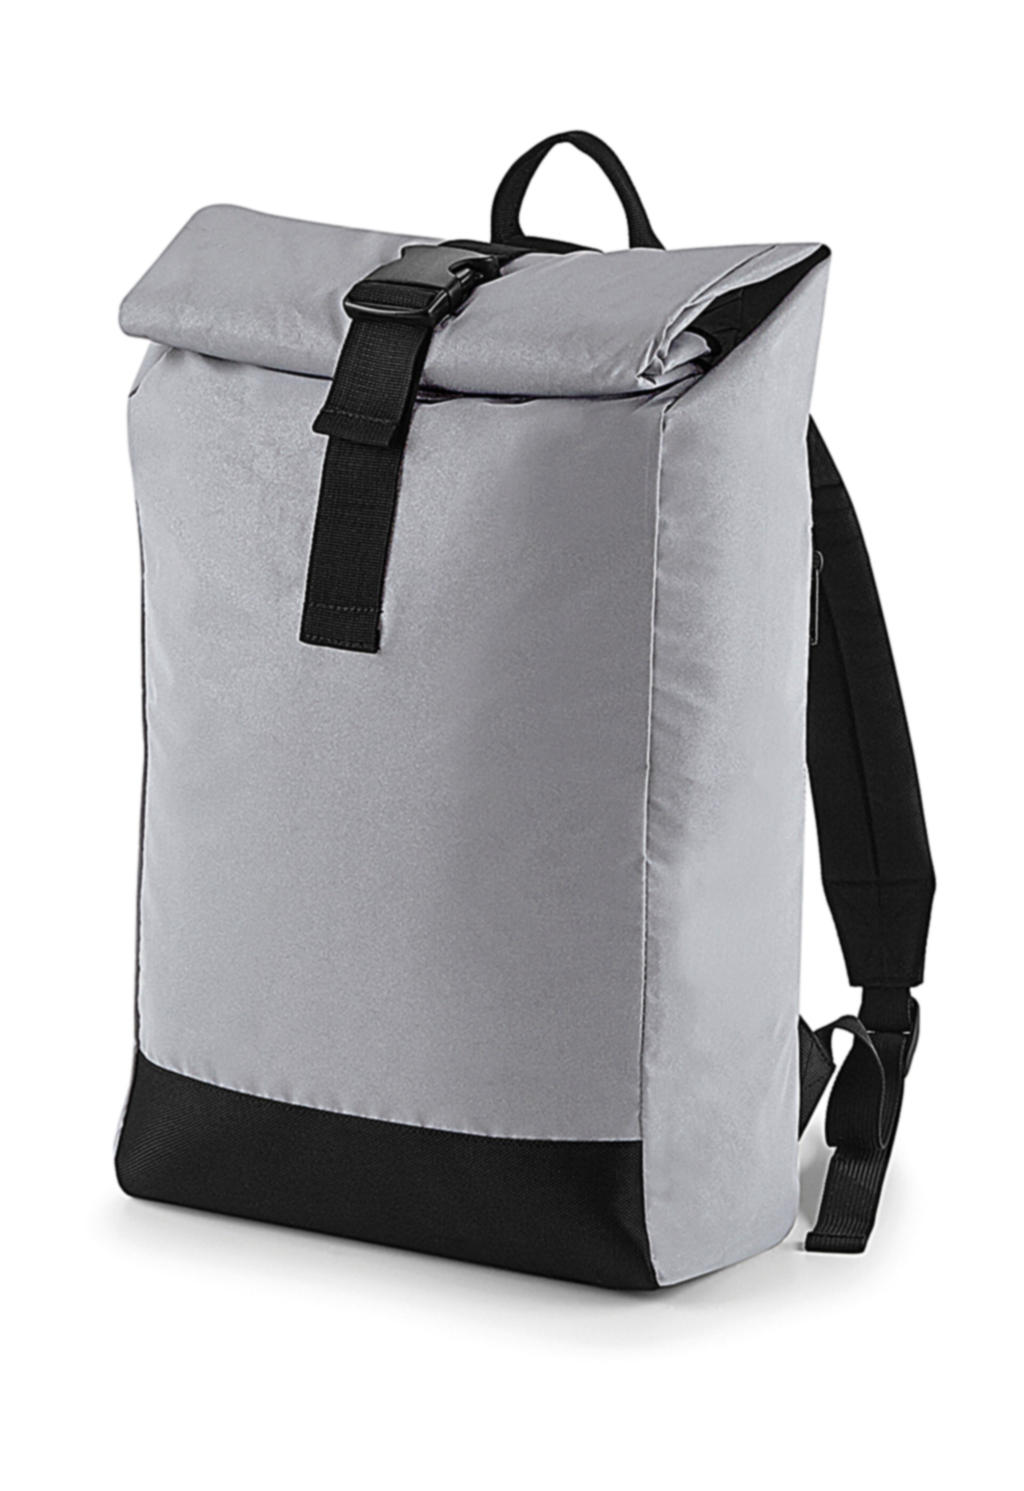  Reflective Roll-Top Backpack in Farbe Silver Reflective